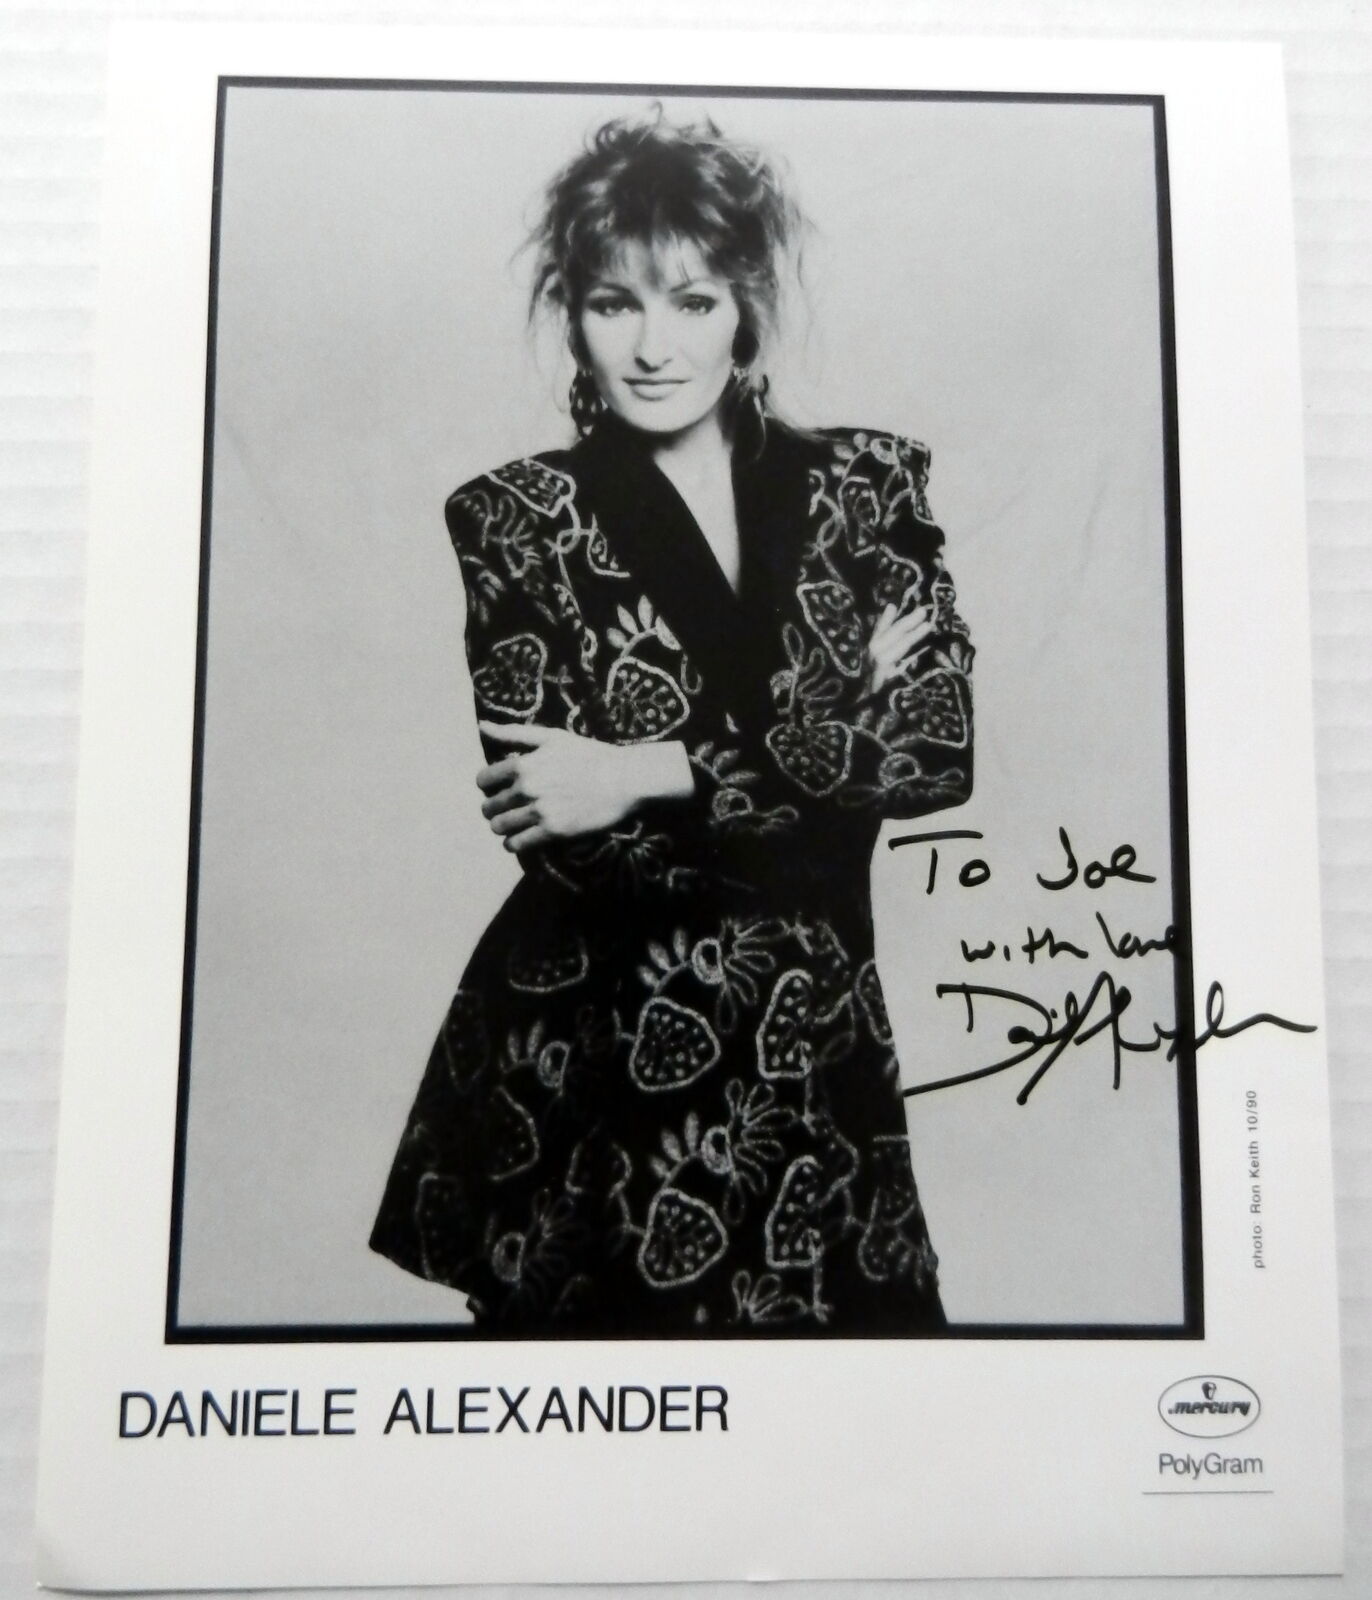 DANIELE ALEXANDER 8 x 10 PROMO Photo Poster painting 80'S COUNTRY WESTERN Singer SHE'S THERE